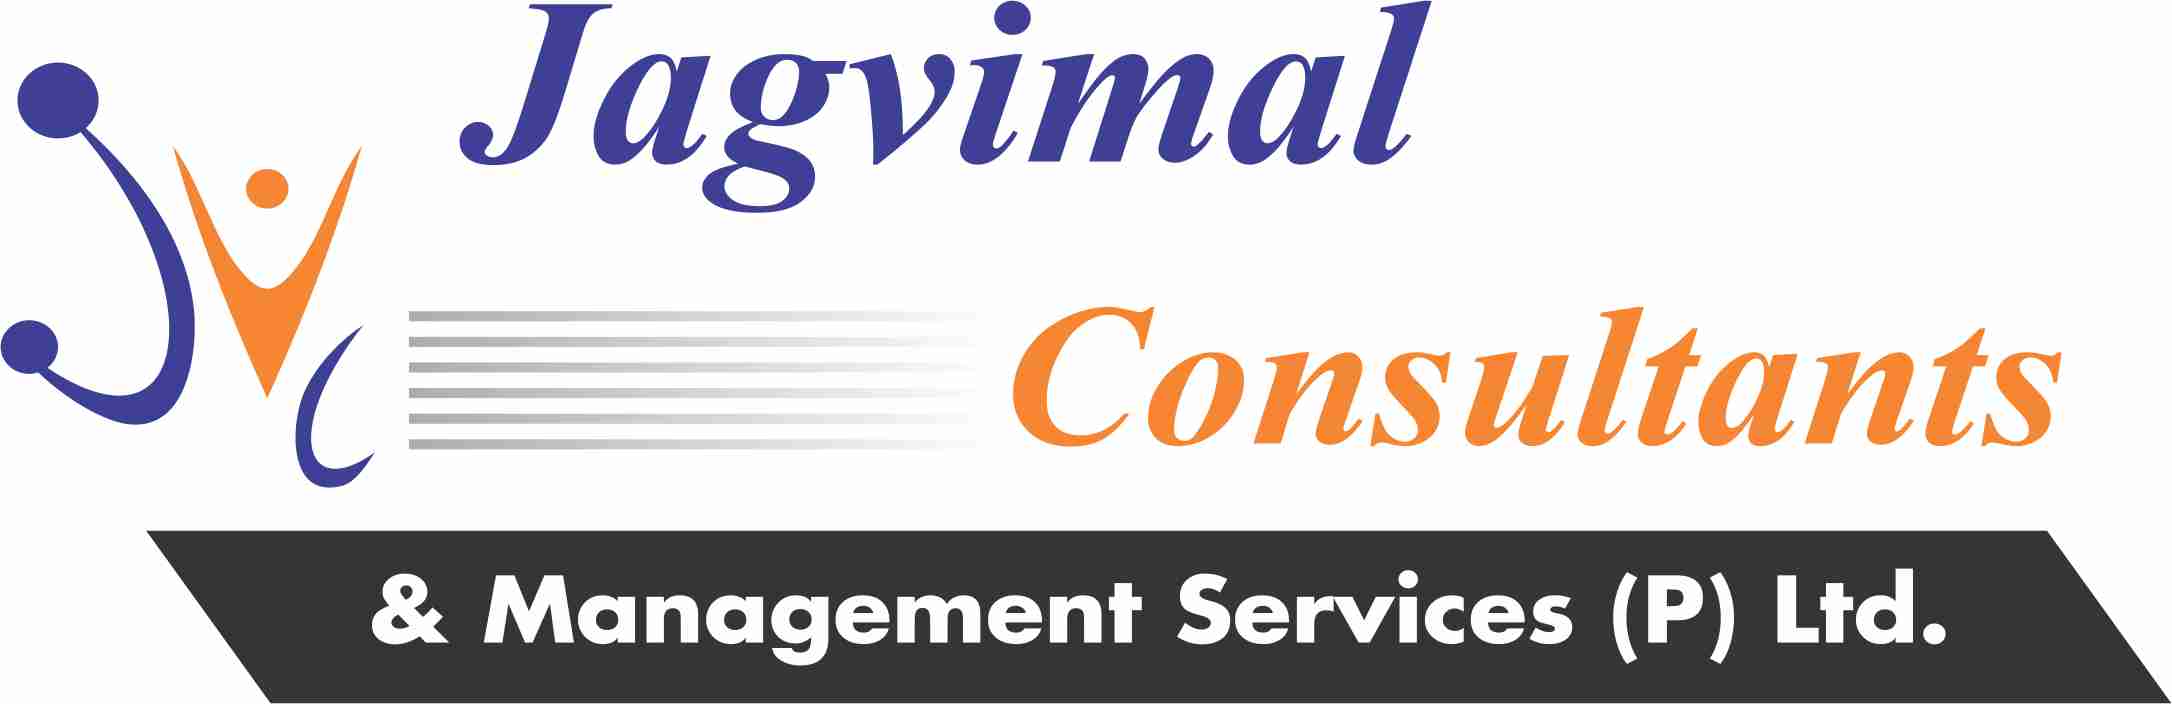 https://www.mncjobsindia.com/company/jagvimal-consultants-management-services-1675146547